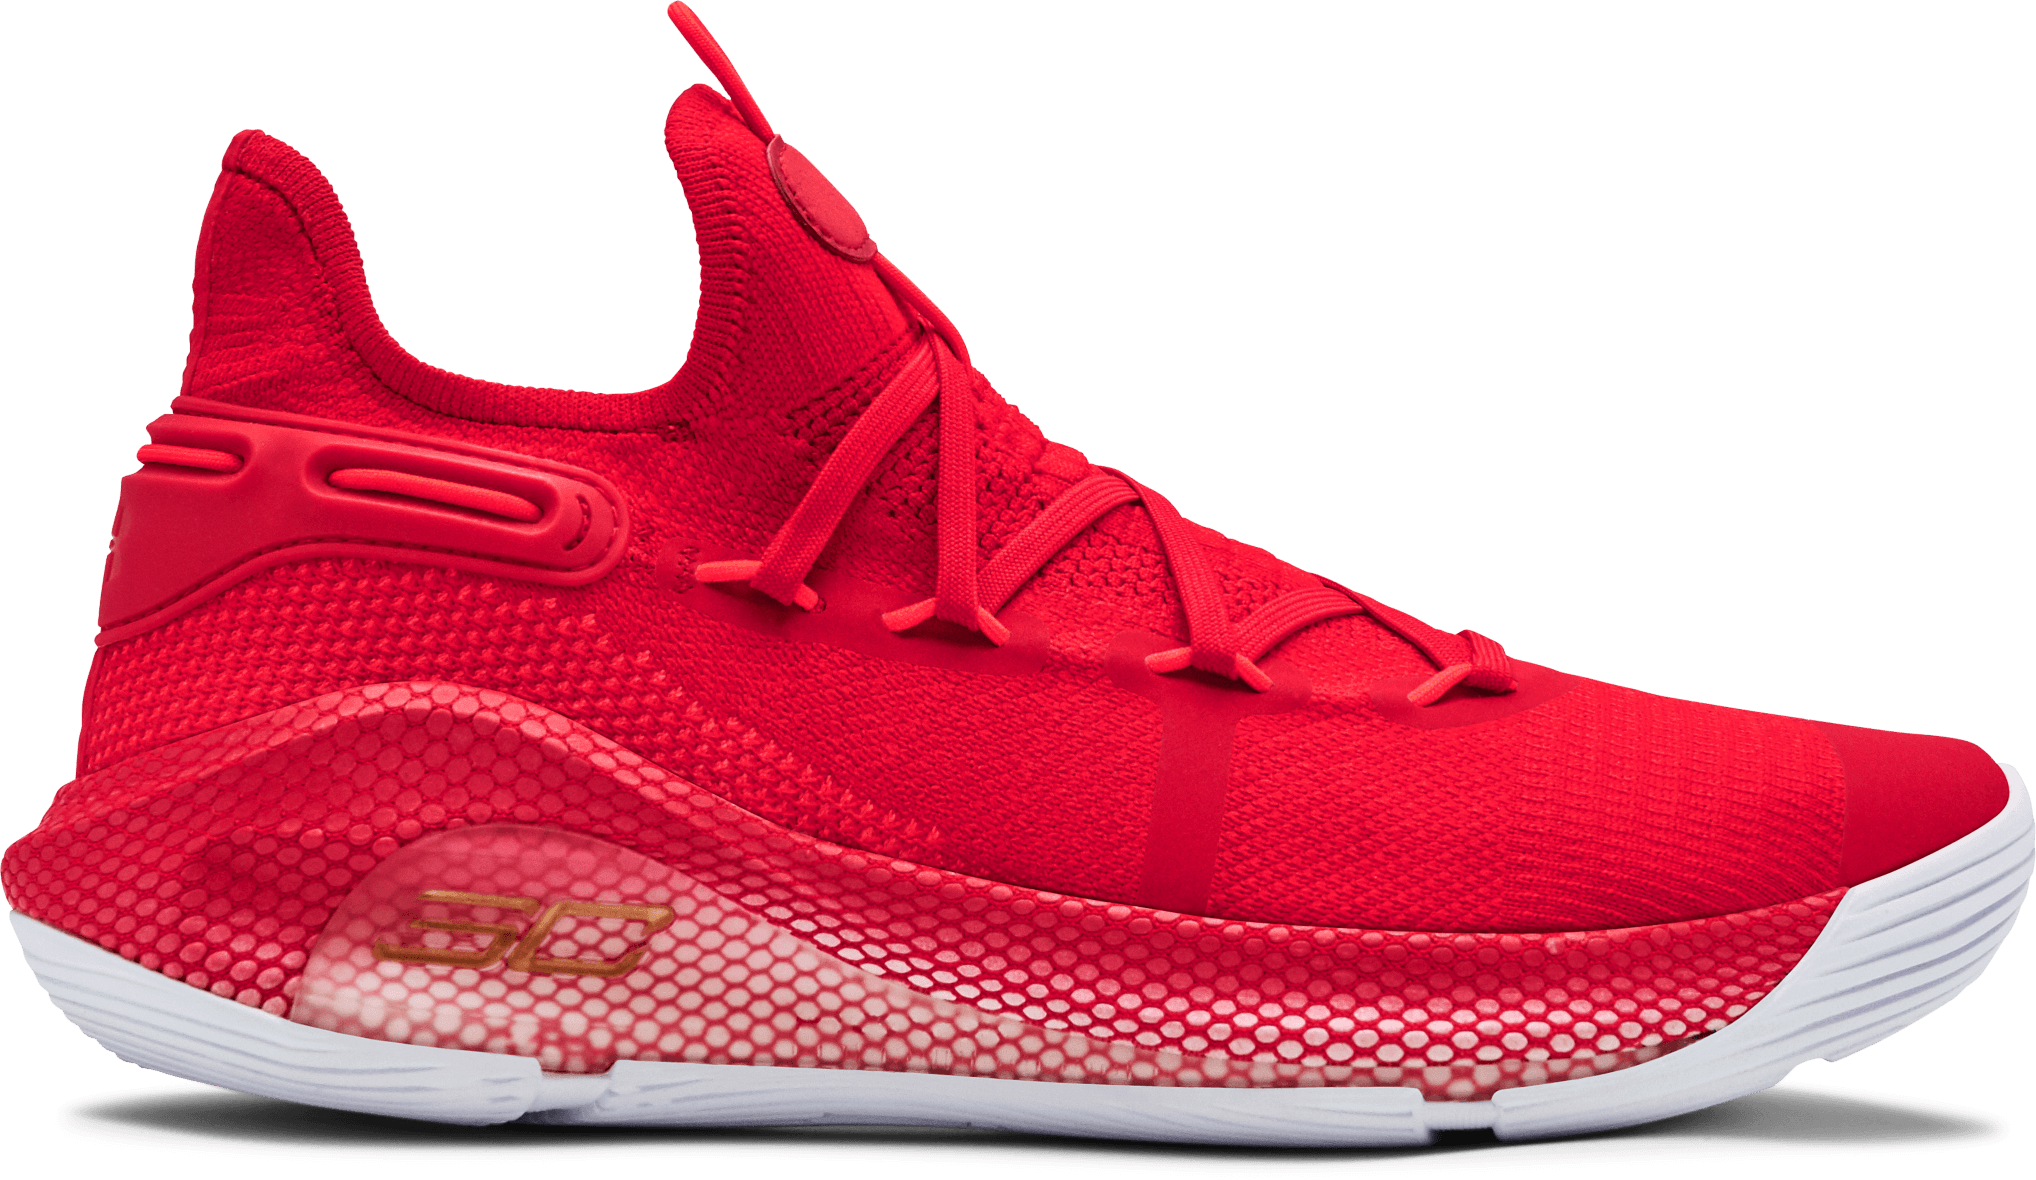 Under Armour Curry 6 - Review, Deals, Pics of 15 Colorways